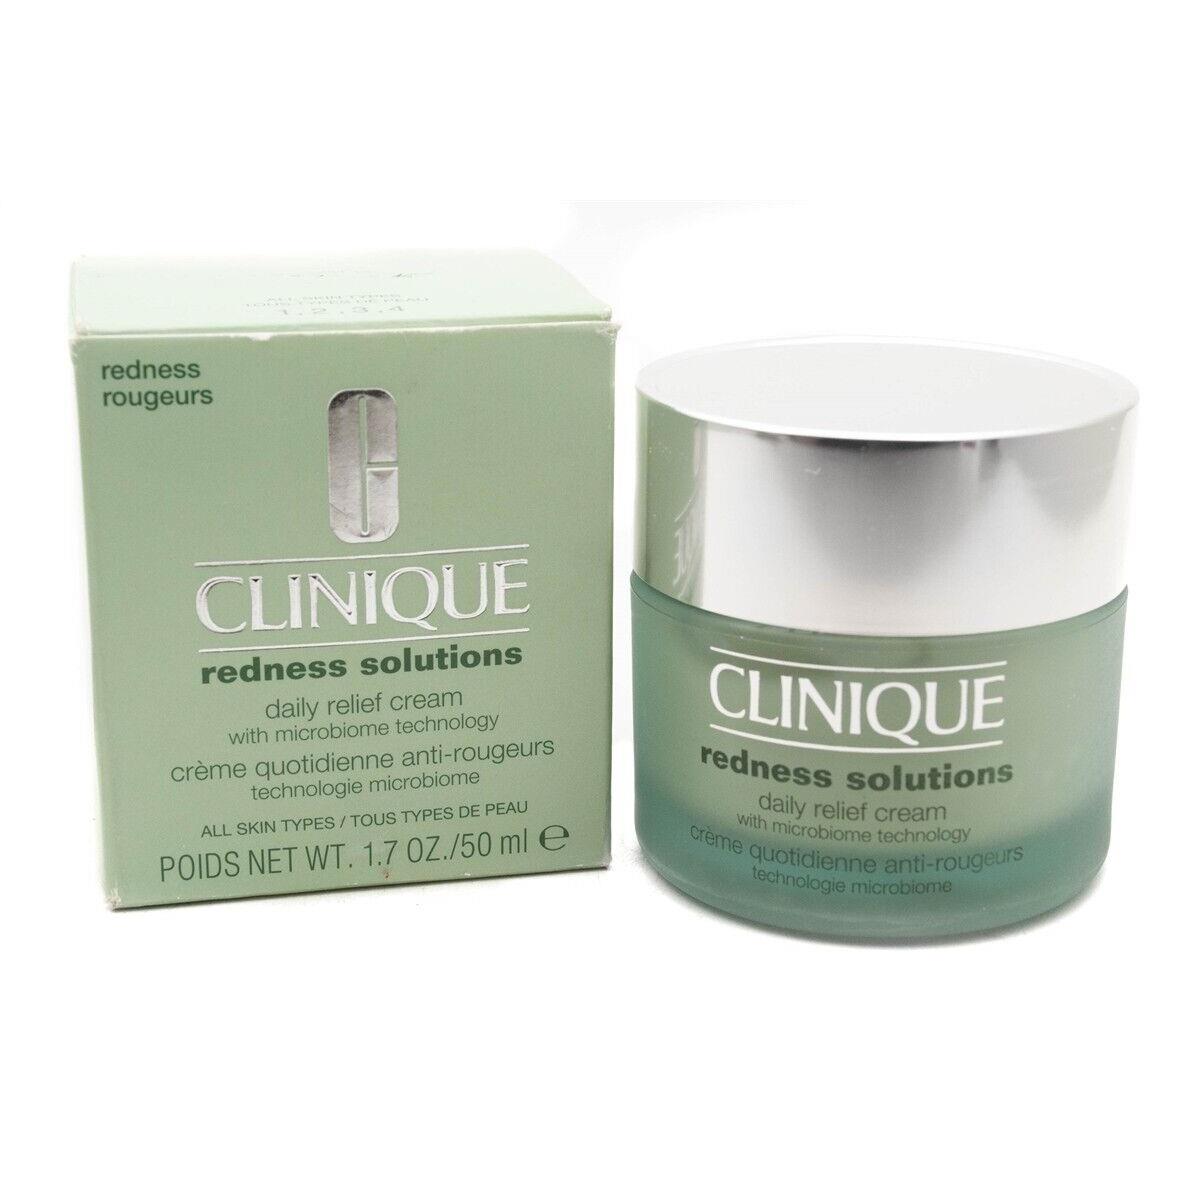 Clinique Redness Solutions Daily Relief Cream with Microbiome Technology 1.7 oz